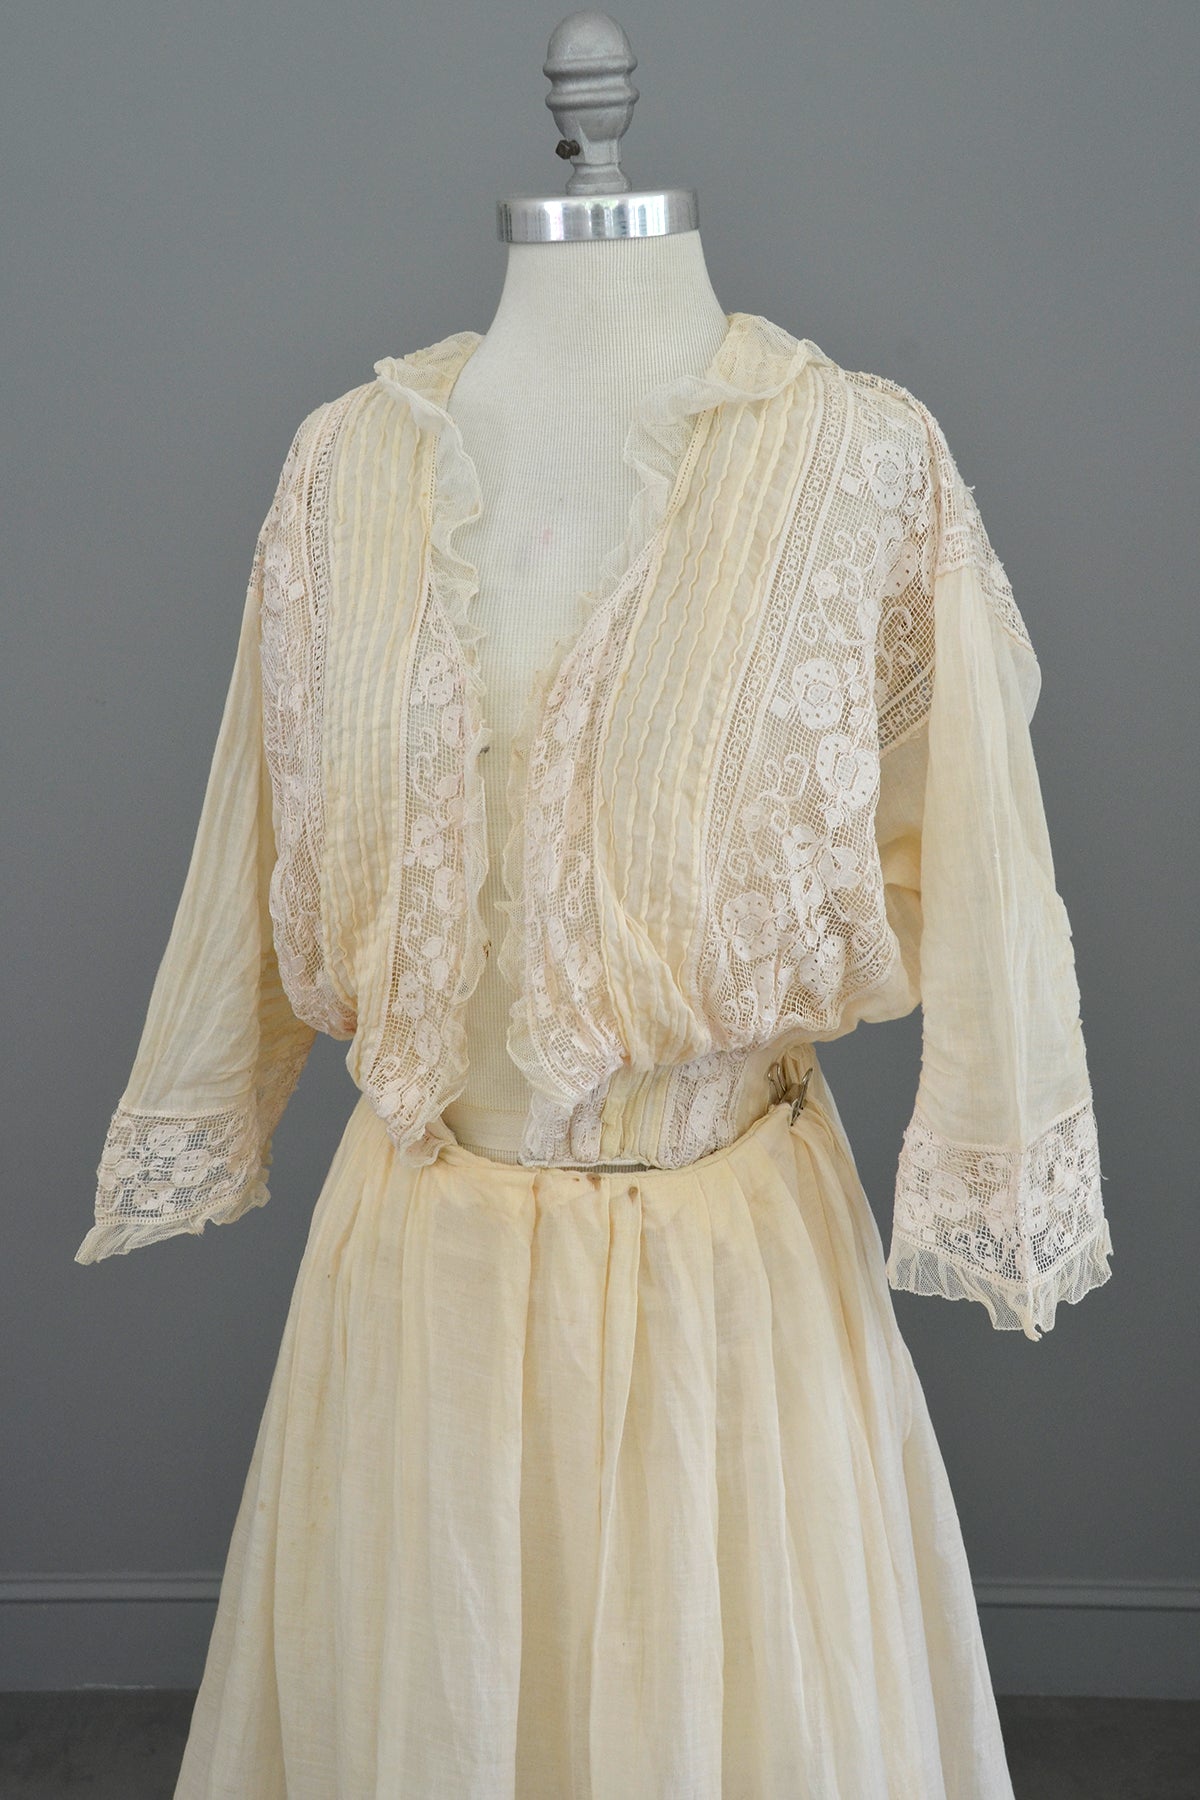 Edwardian Dress with Needlepoint Trim and Tiered Bell Skirt